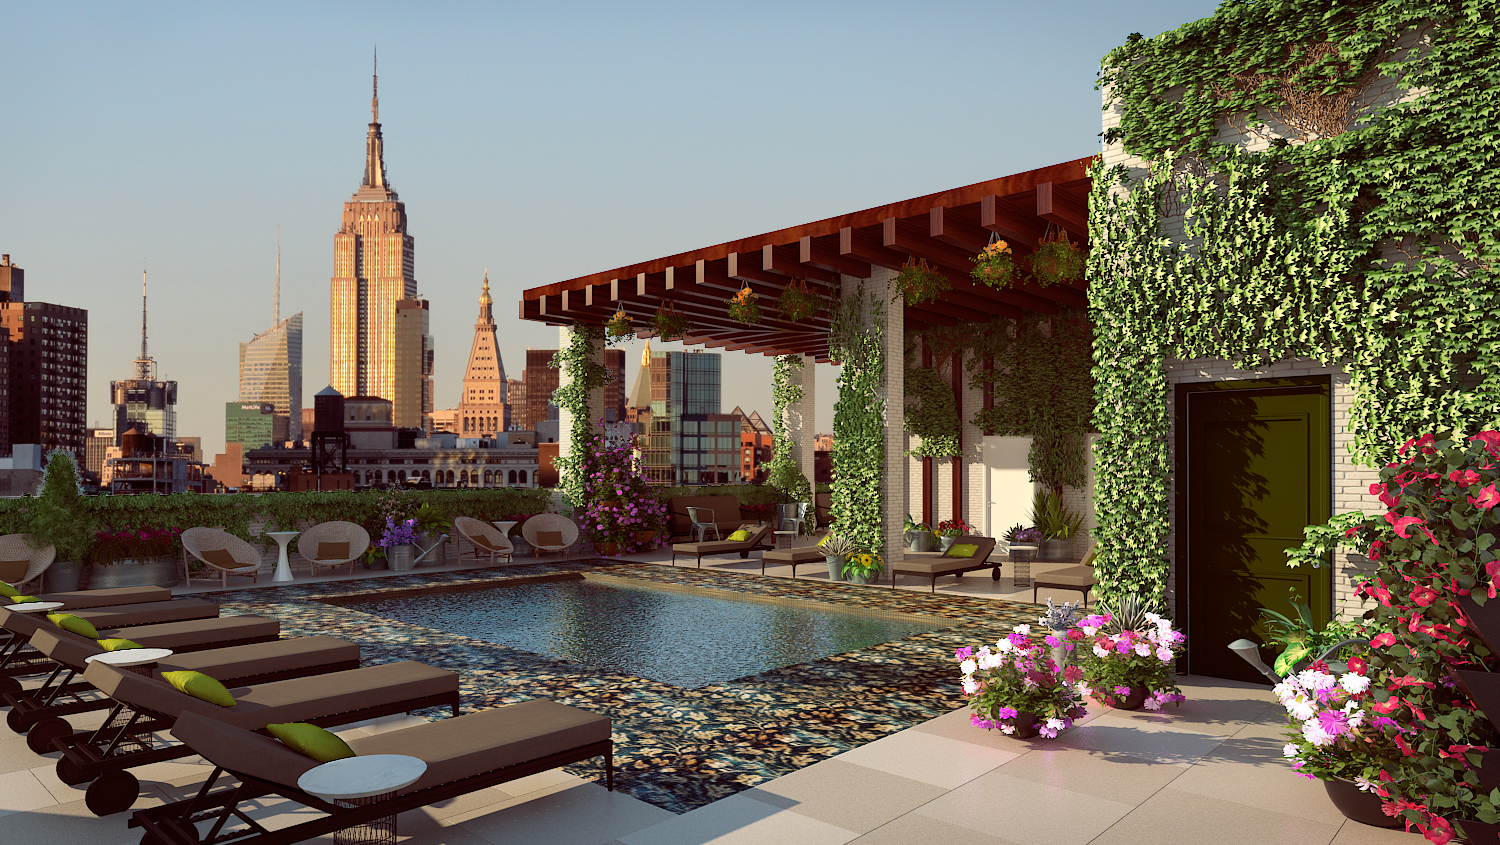 A rendering of the Somewhere Nowhere rooftop pool at the Renaissance New York Chelsea Hotel.